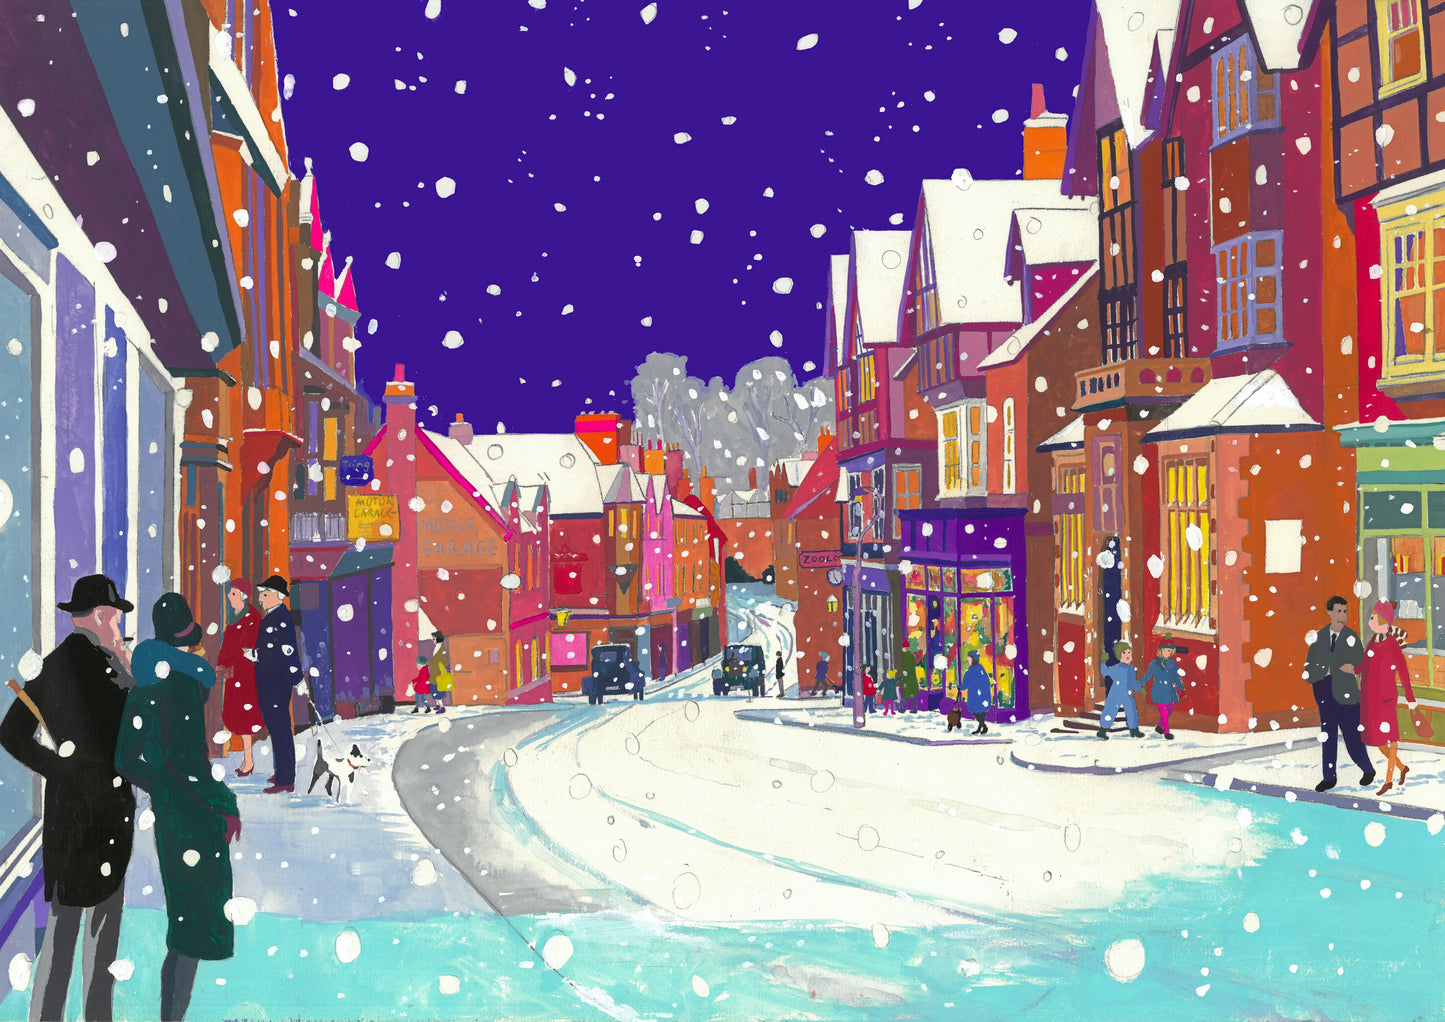 Tring High St in the snow Original Painting